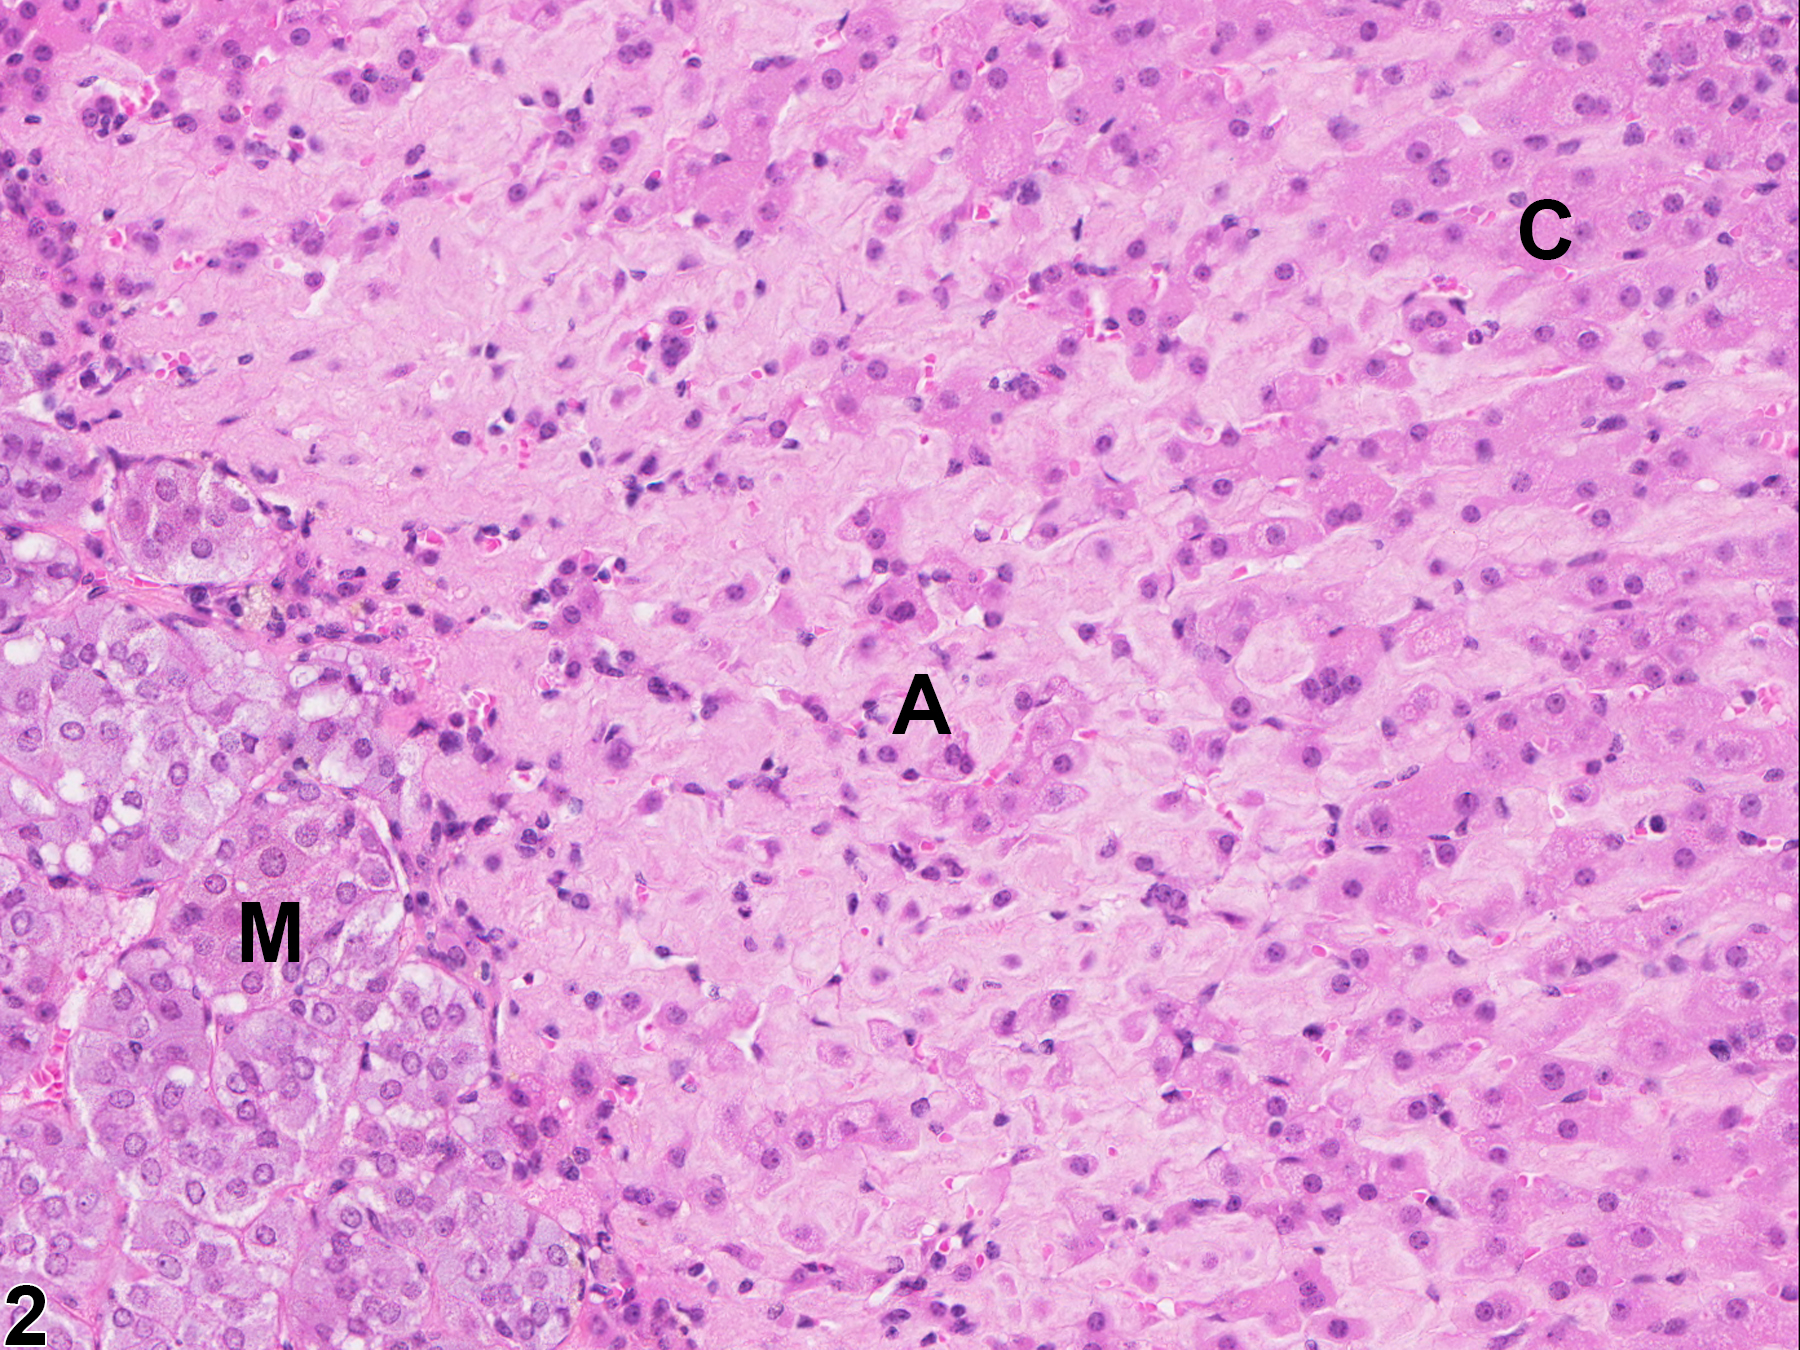 Image of amyloid in the adrenal gland from a male B6C3F1/N mouse in a chronic study